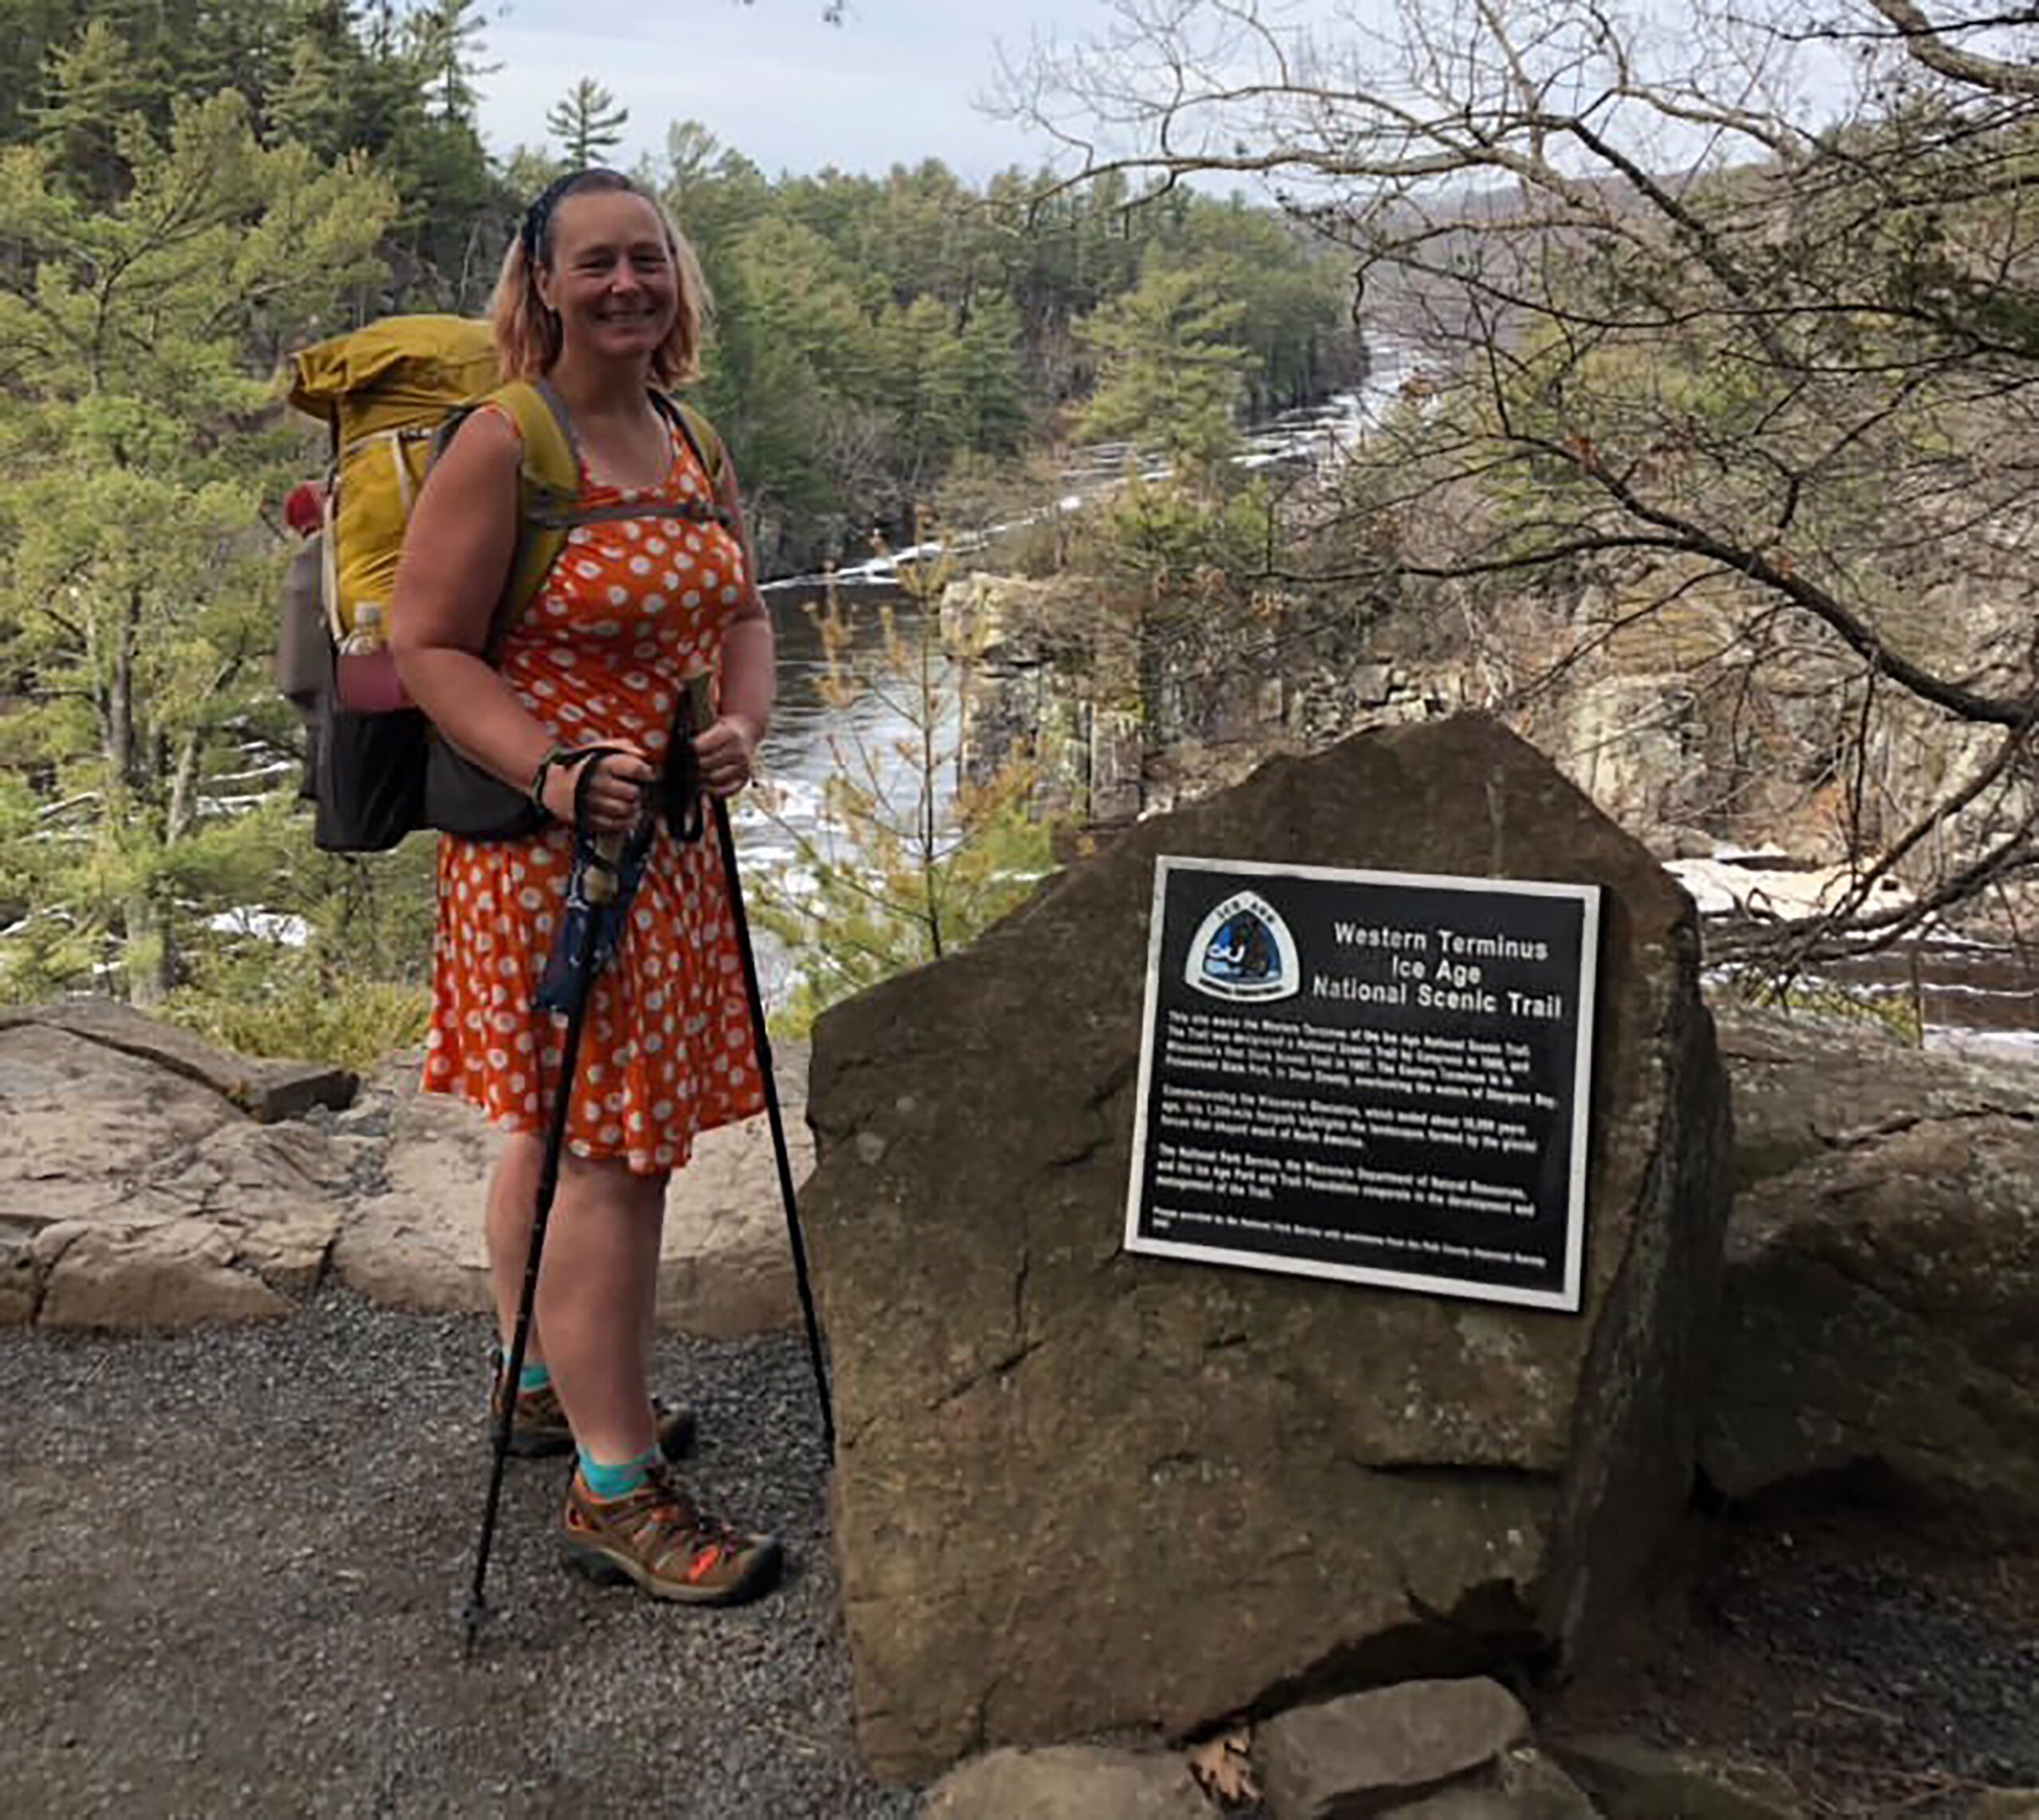 Arlette Laan will soon be the first female hiker to complete all 11 national scenic trails